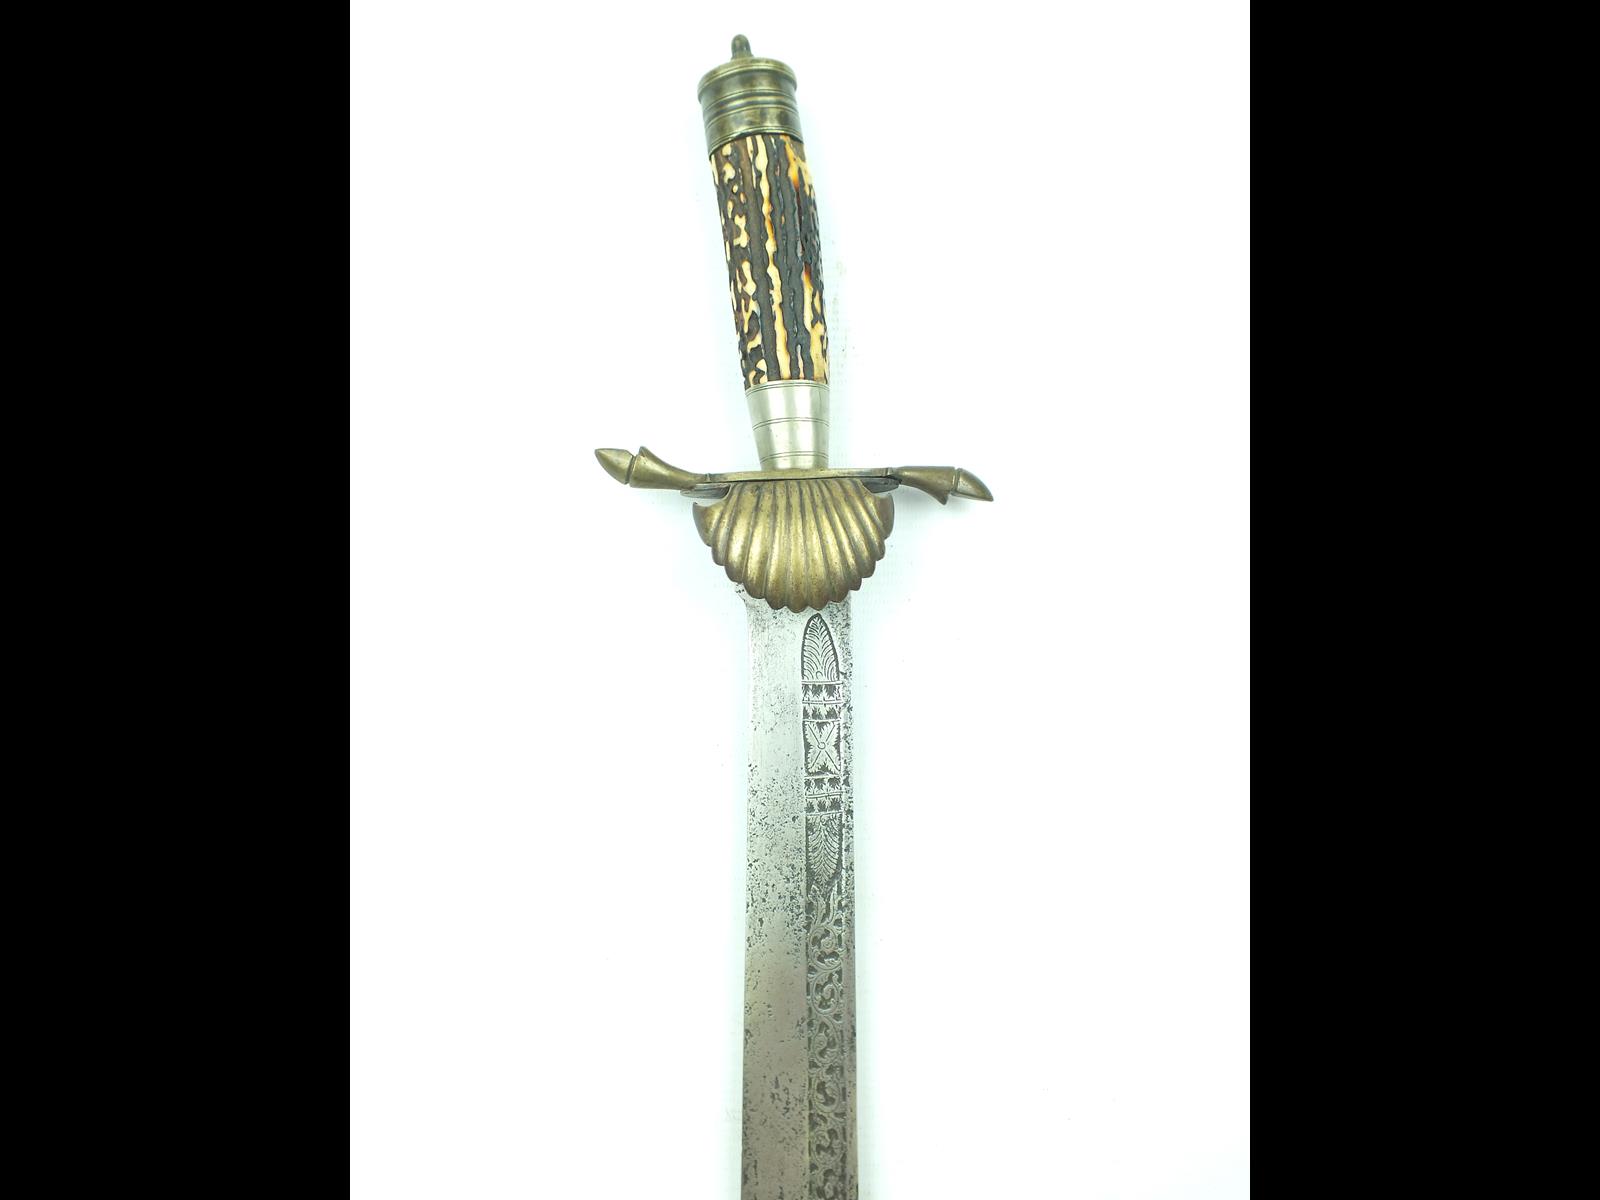 A 19th Century Dutch East Indies Hunting Hanger with Klewang Blade, 57.5cm blade decorated with